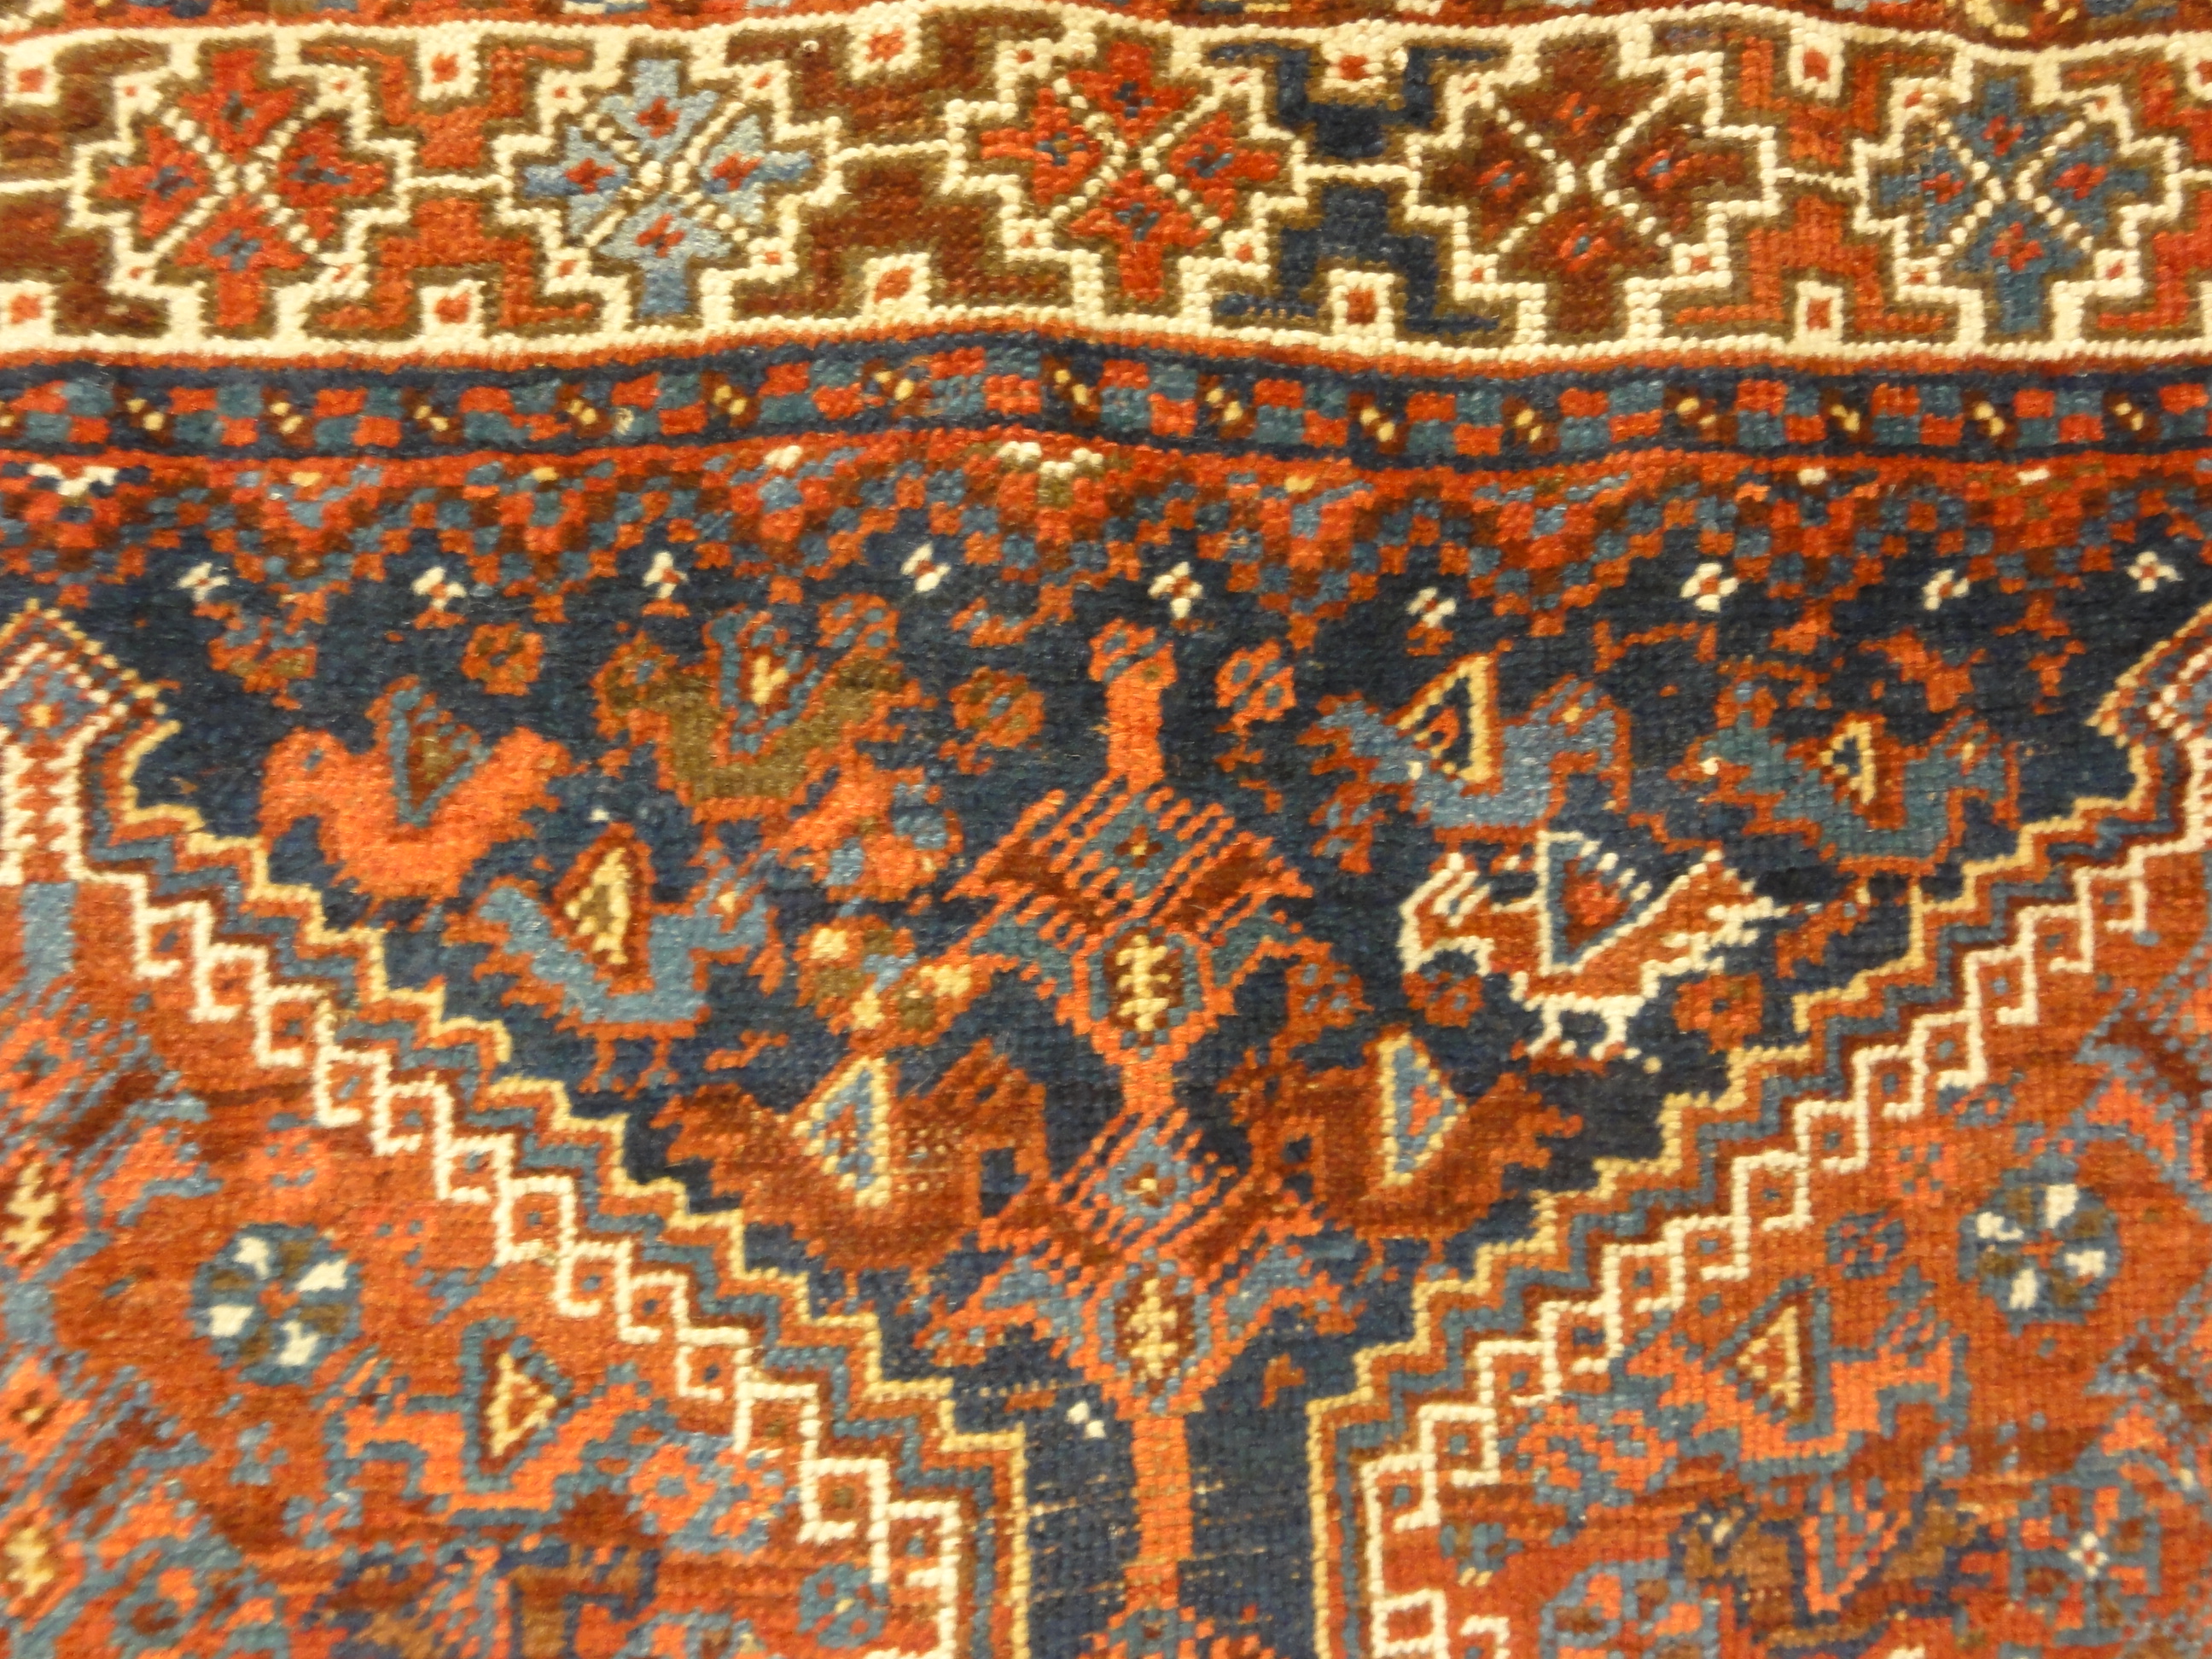 Antique Khamseh Chicken Rug. A piece of genuine authentic antique woven carpet art sold by Santa Barbara Design Center, Rugs and More.